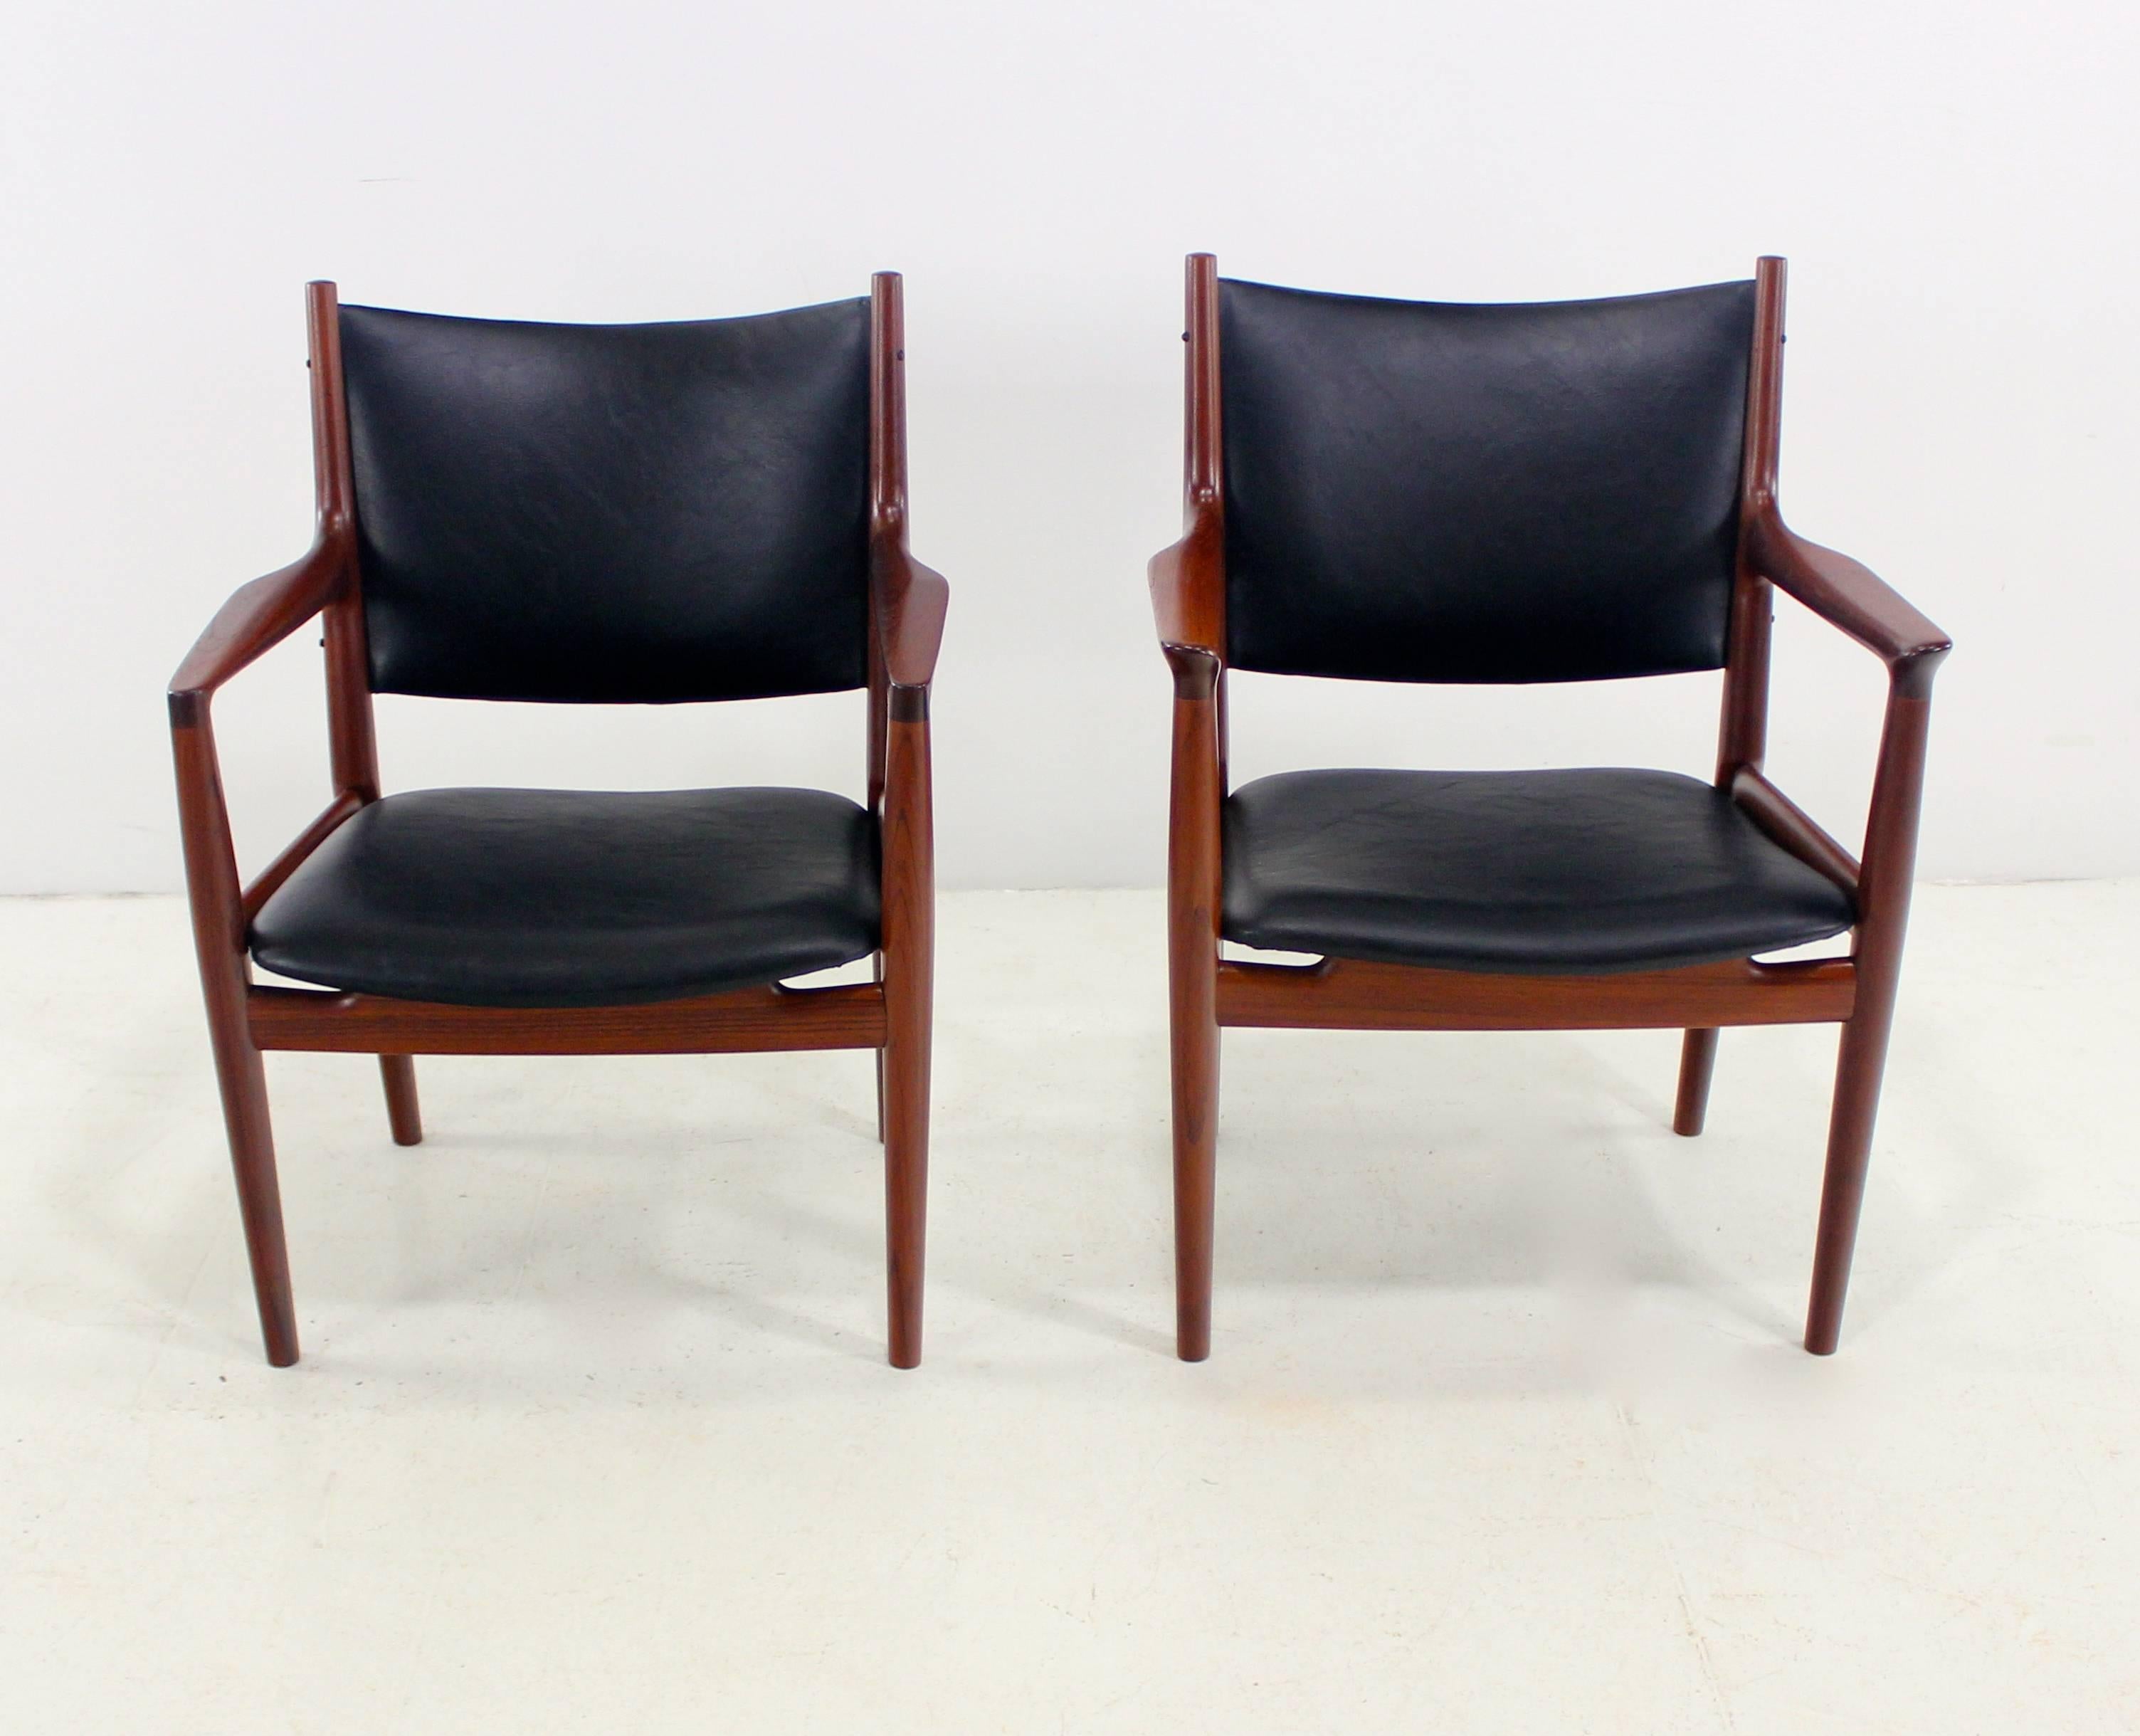 Illusive Danish modern papa & mama sized armchairs designed by Hans Wegner.
Johannes Hansen, maker. Model JH713.
Richly grained teak frames.
Seats and backs newly upholstered in highest quality Industrial grade leather backed vinyl.
Papa chair